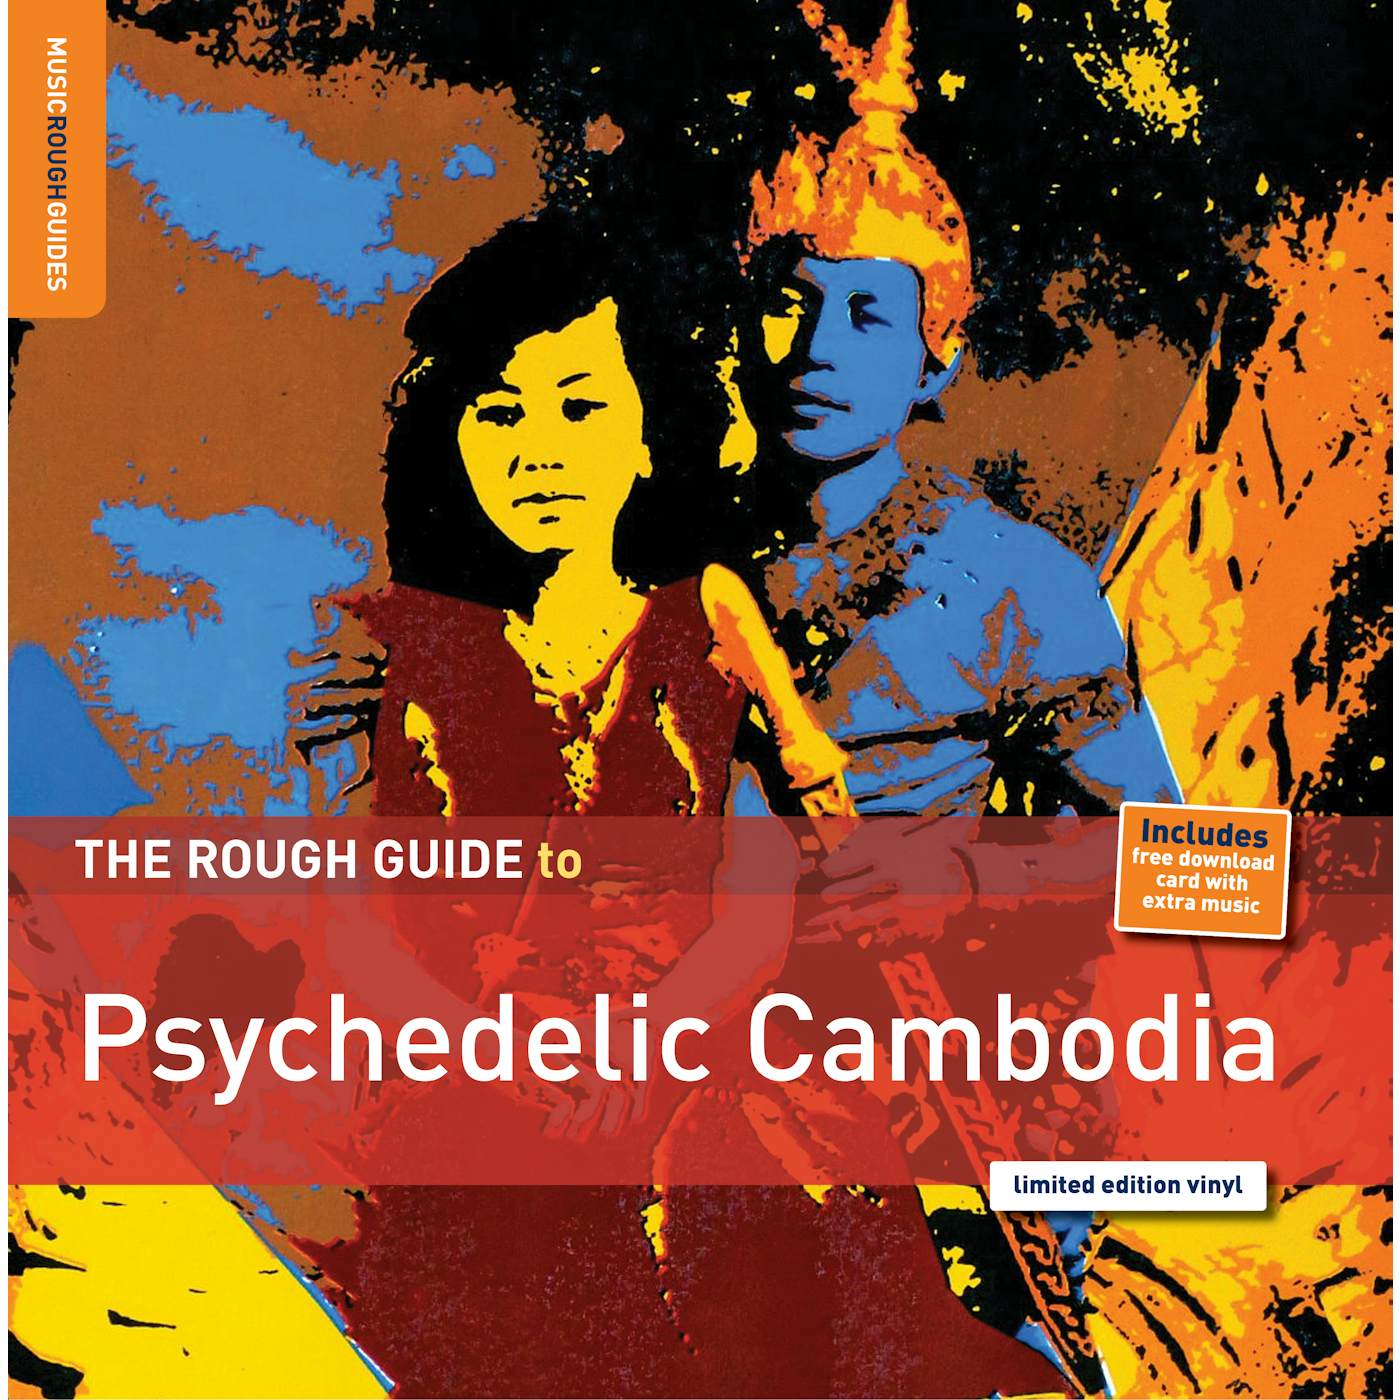 ROUGH GUIDE TO PSYCHEDELIC CAMBODIA / VARIOUS Vinyl Record